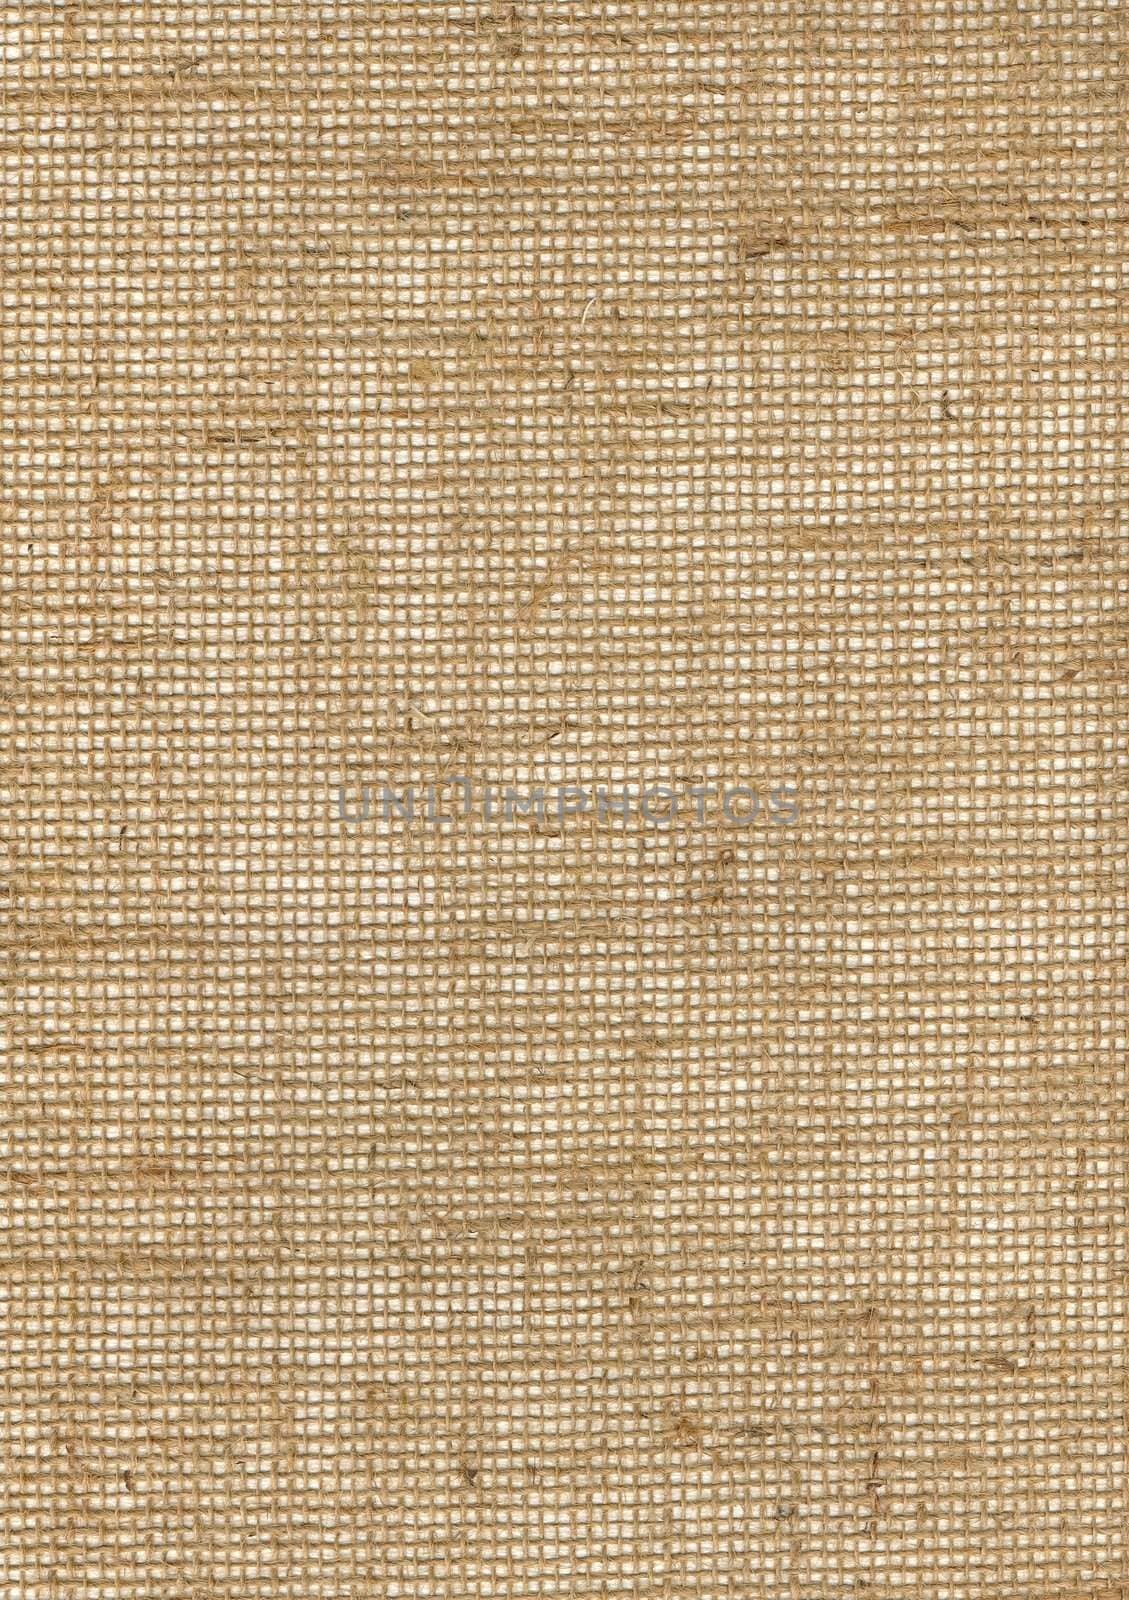 Rough woven jute fabric in natural color by Nonboe